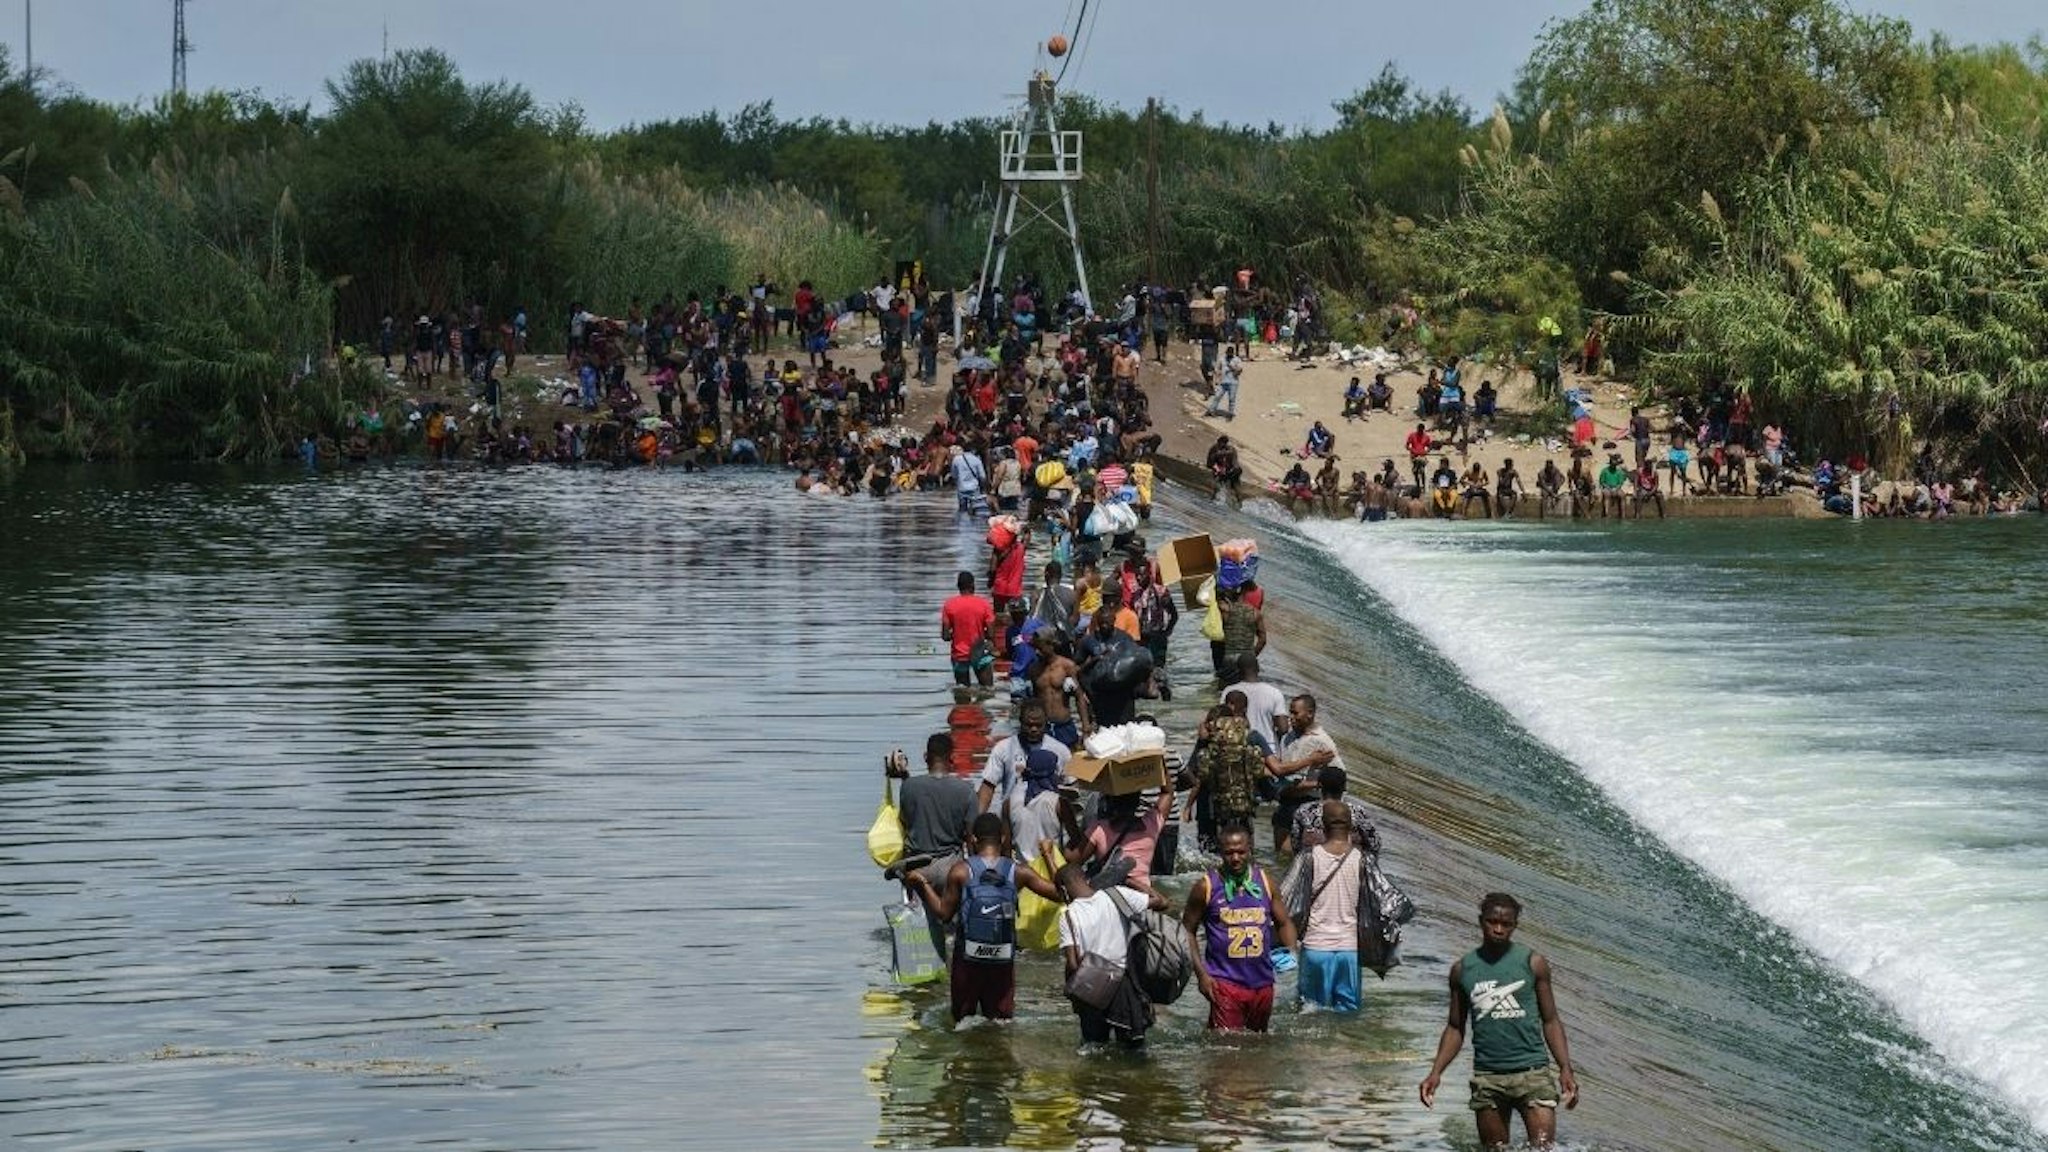 Migrants, many of them Haitian, cross the Rio Grande to get food and supplies near the Del Rio-Acuna Port of Entry in Ciudad Acuna, Coahuila state, Mexico on September 18, 2021.